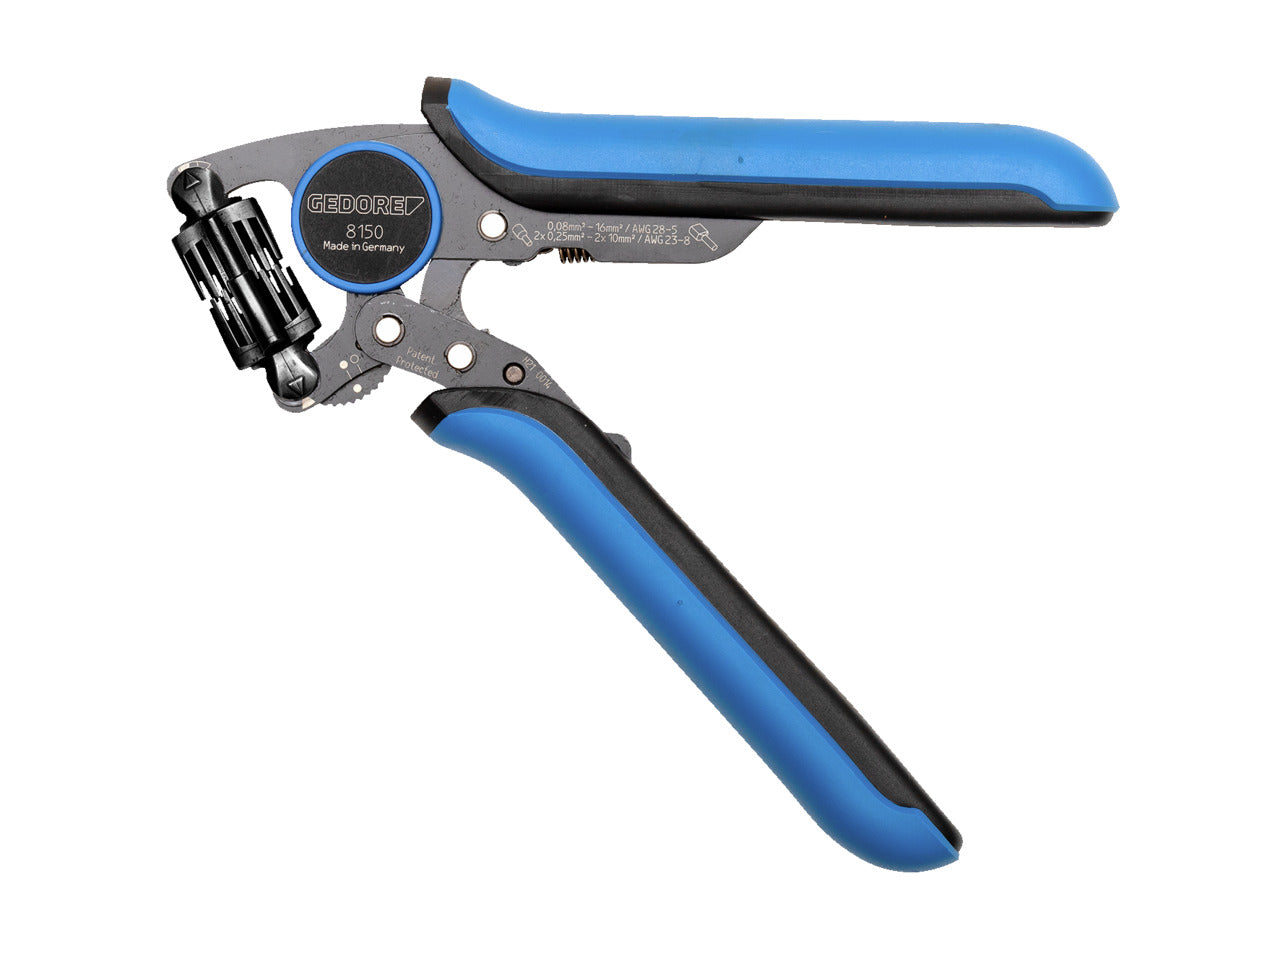 GEDORE 8150 - CrimpMax-360 Professional Cutting Pliers (3416437)